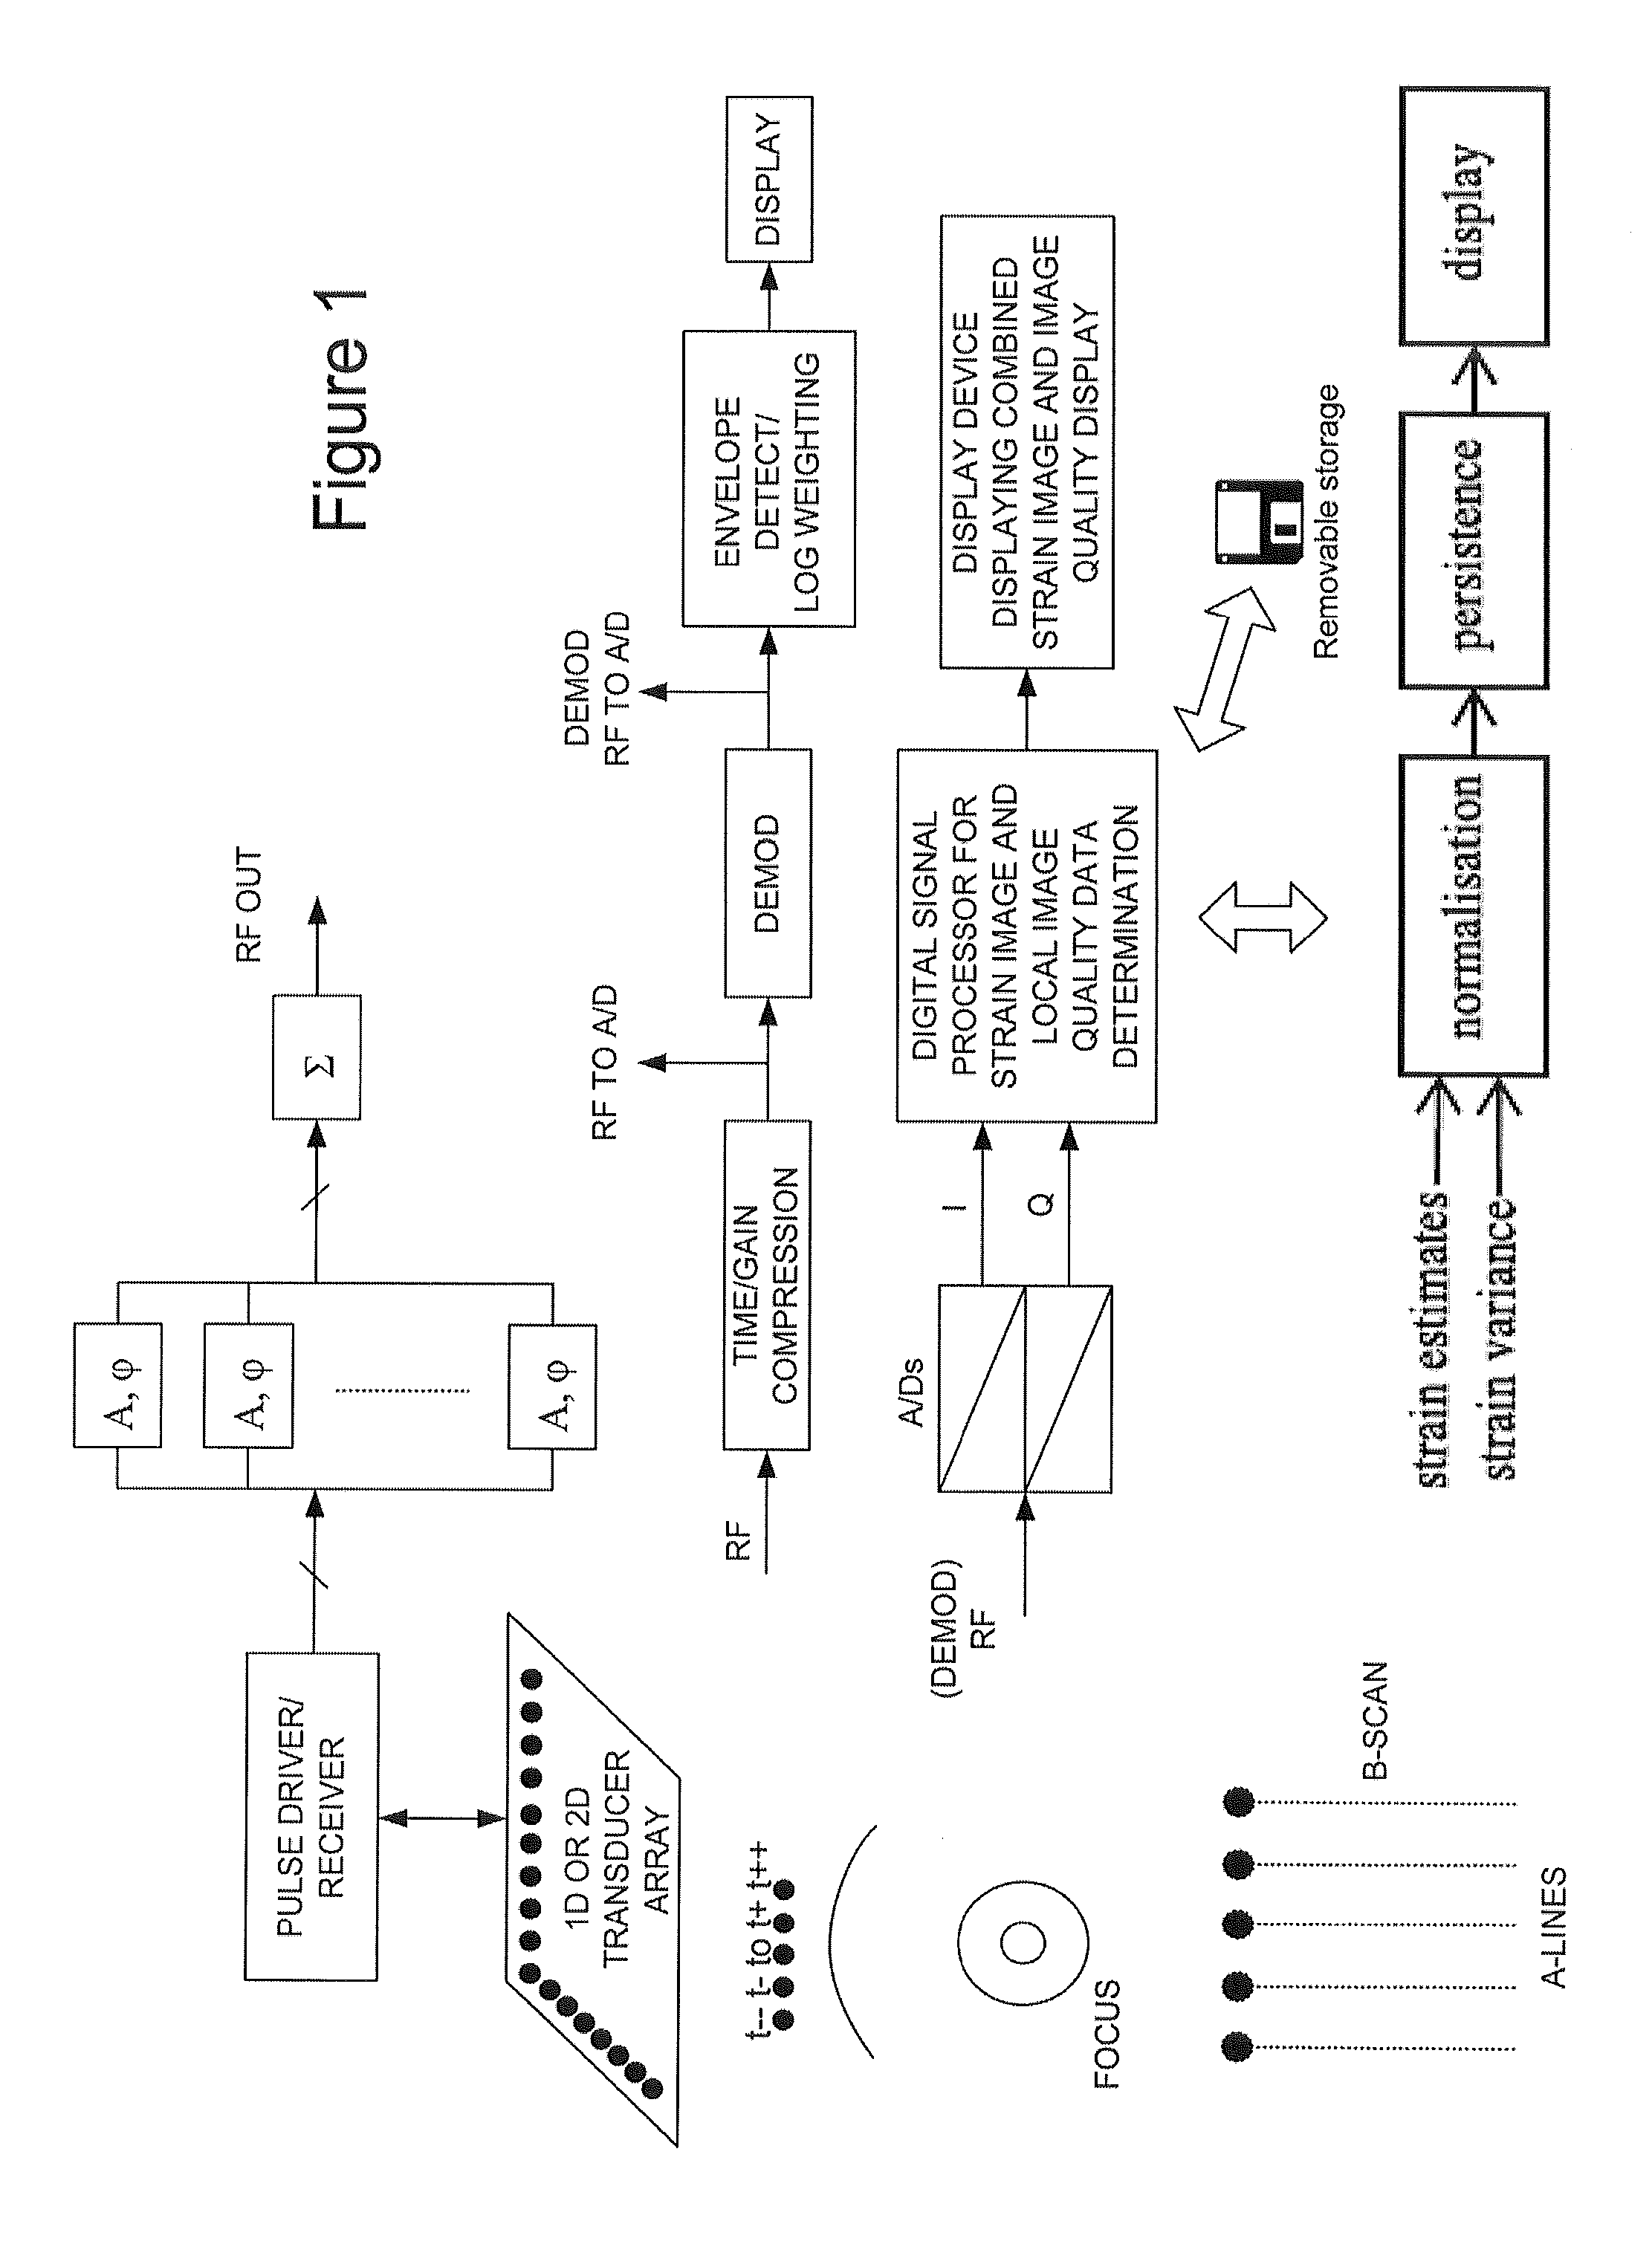 Strain Image Display Systems